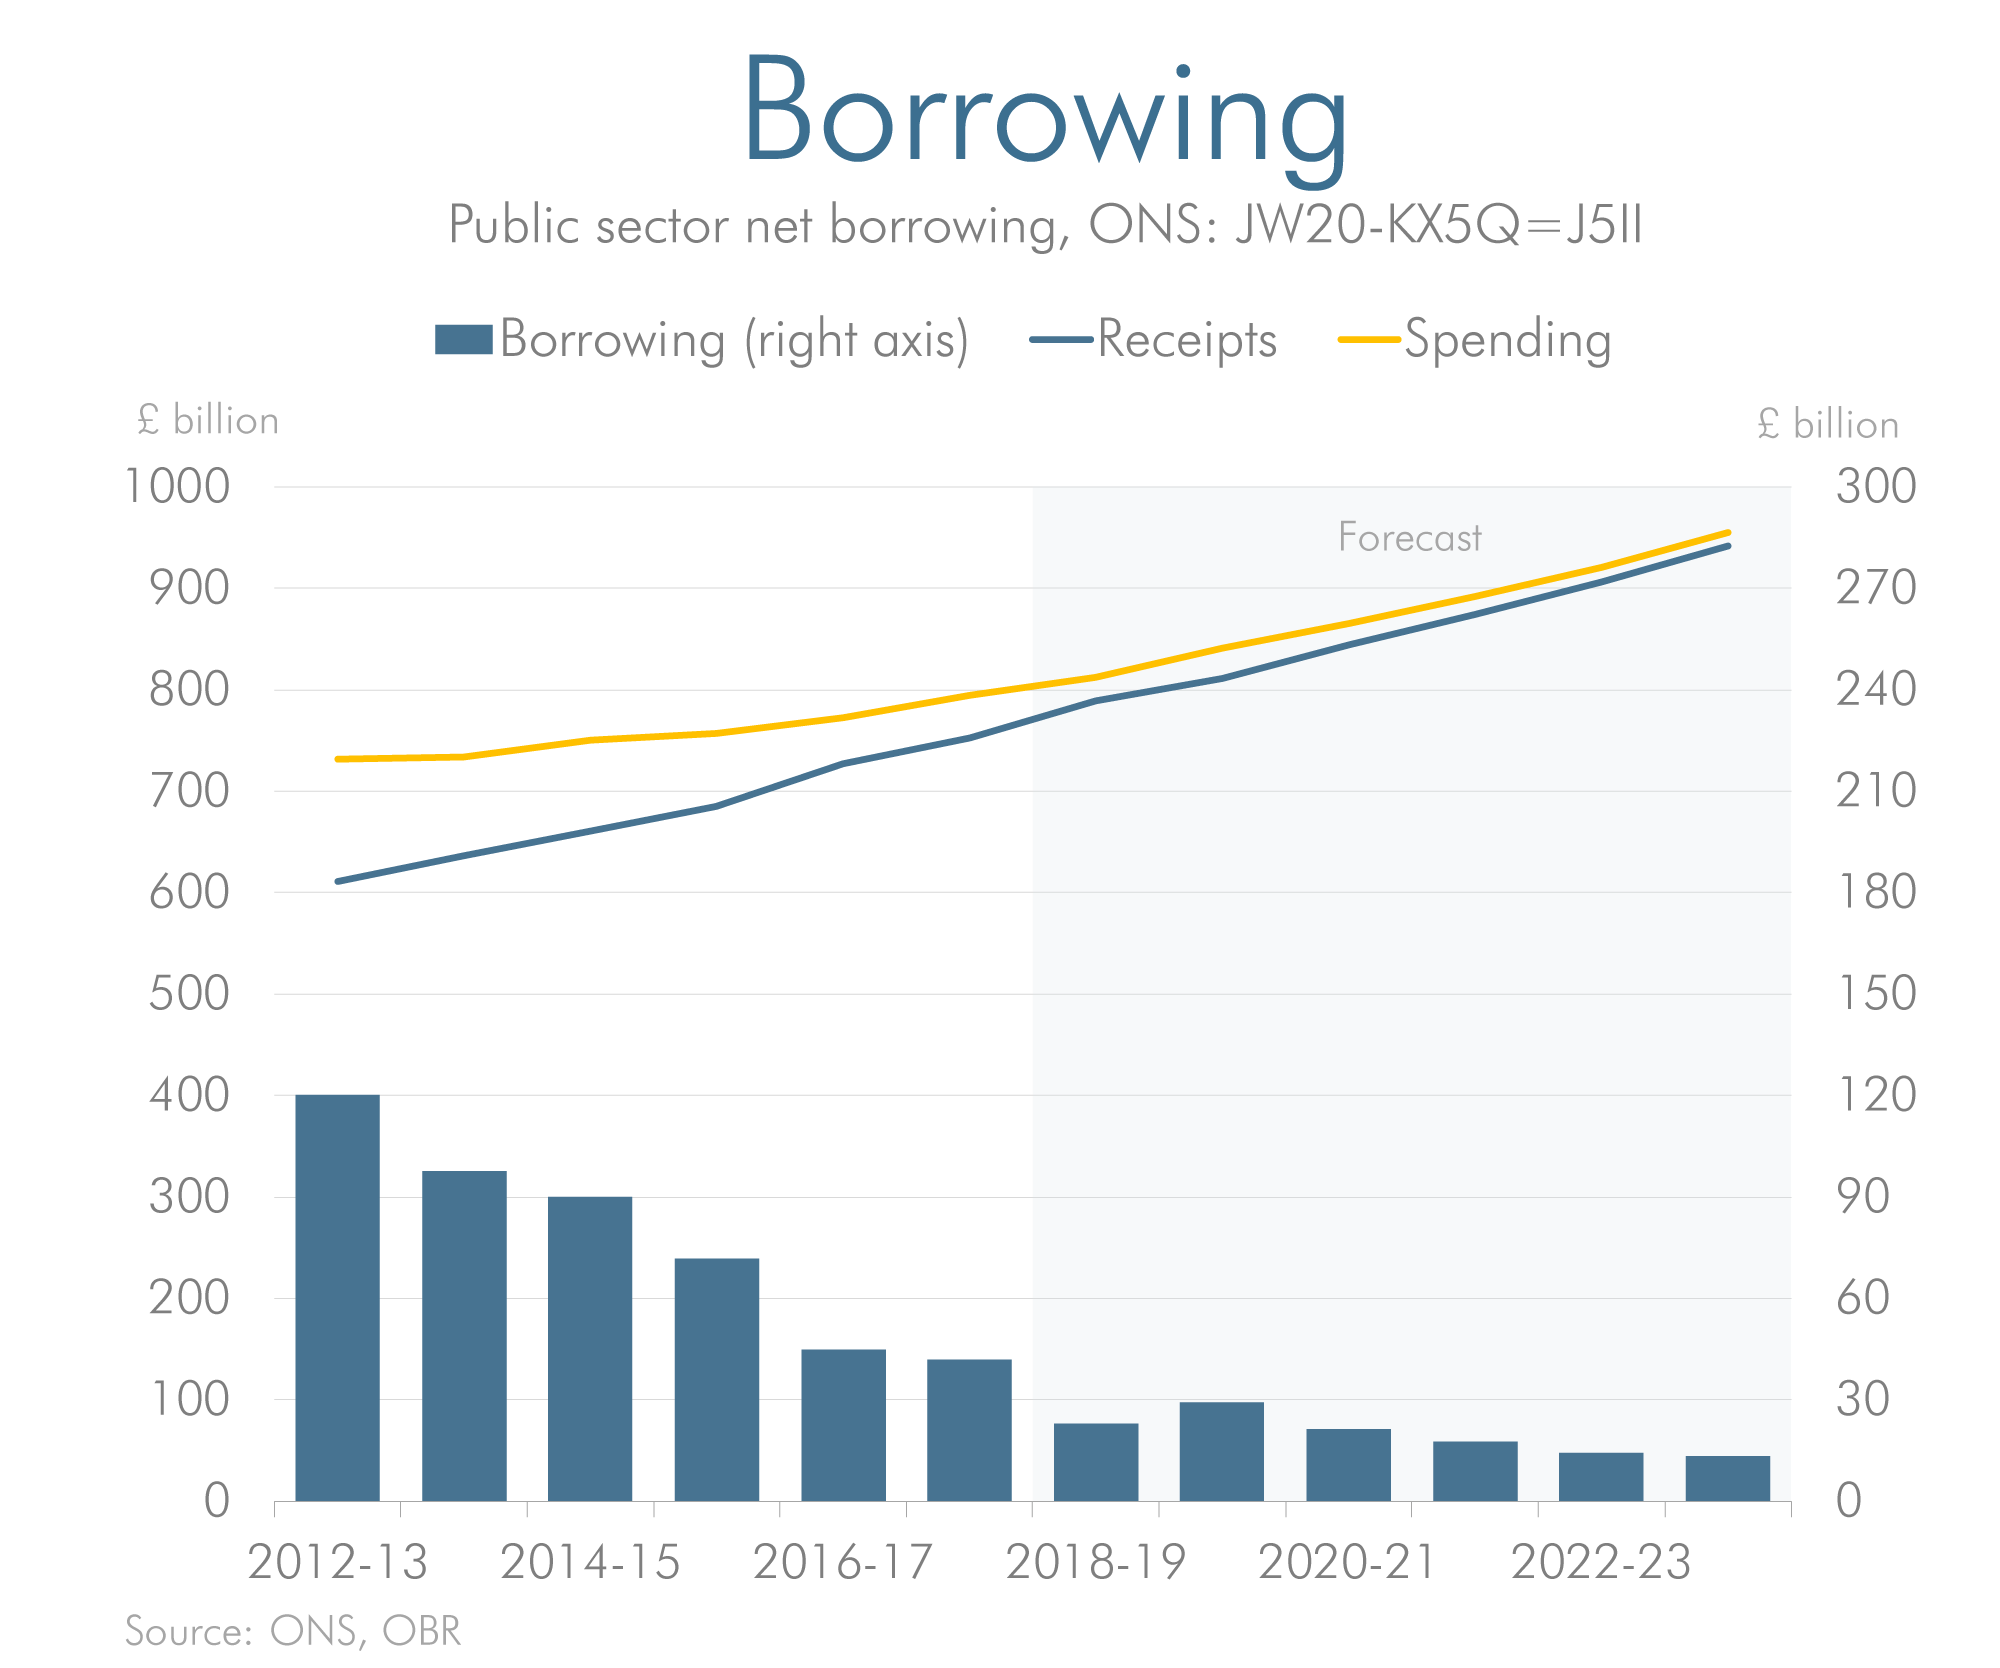 Latest forecast versus previous forecast for borrowing